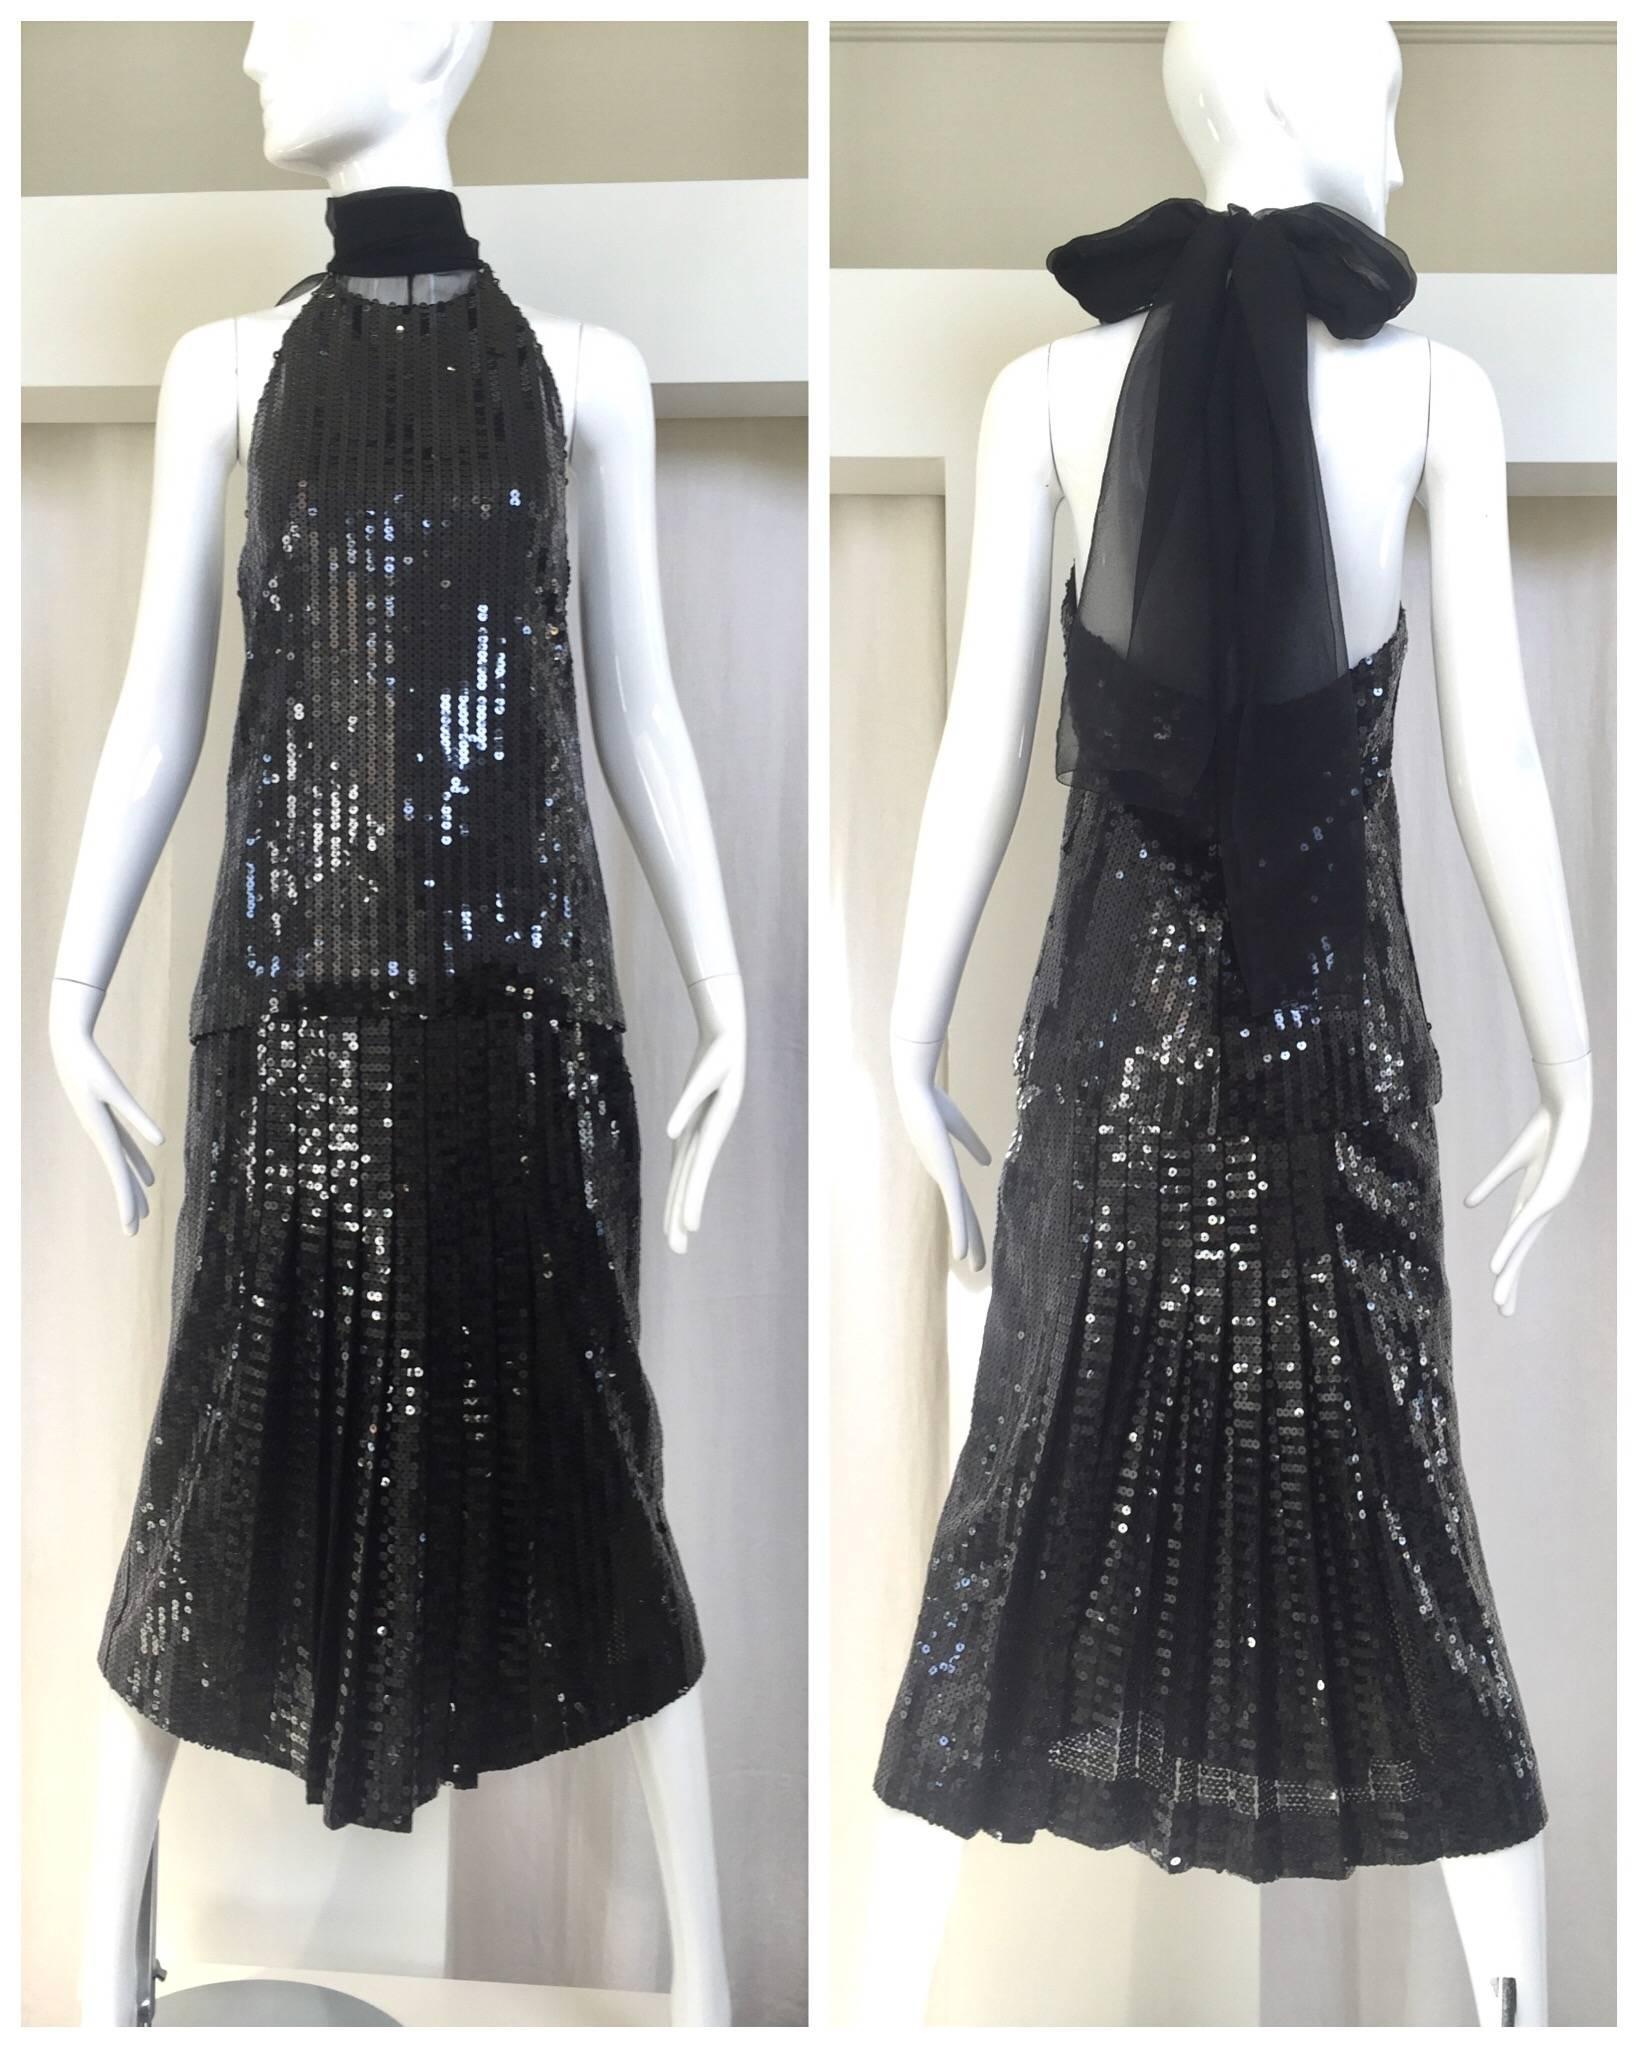 Chic vintage Christian Dior designed by Gianfranco Ferre halter sequin top and pleated skirt set. Top has silk chiffon sash that you can tie it as a bow.
 Size 4. Top fit size 4 Small
Skirt waist: 23